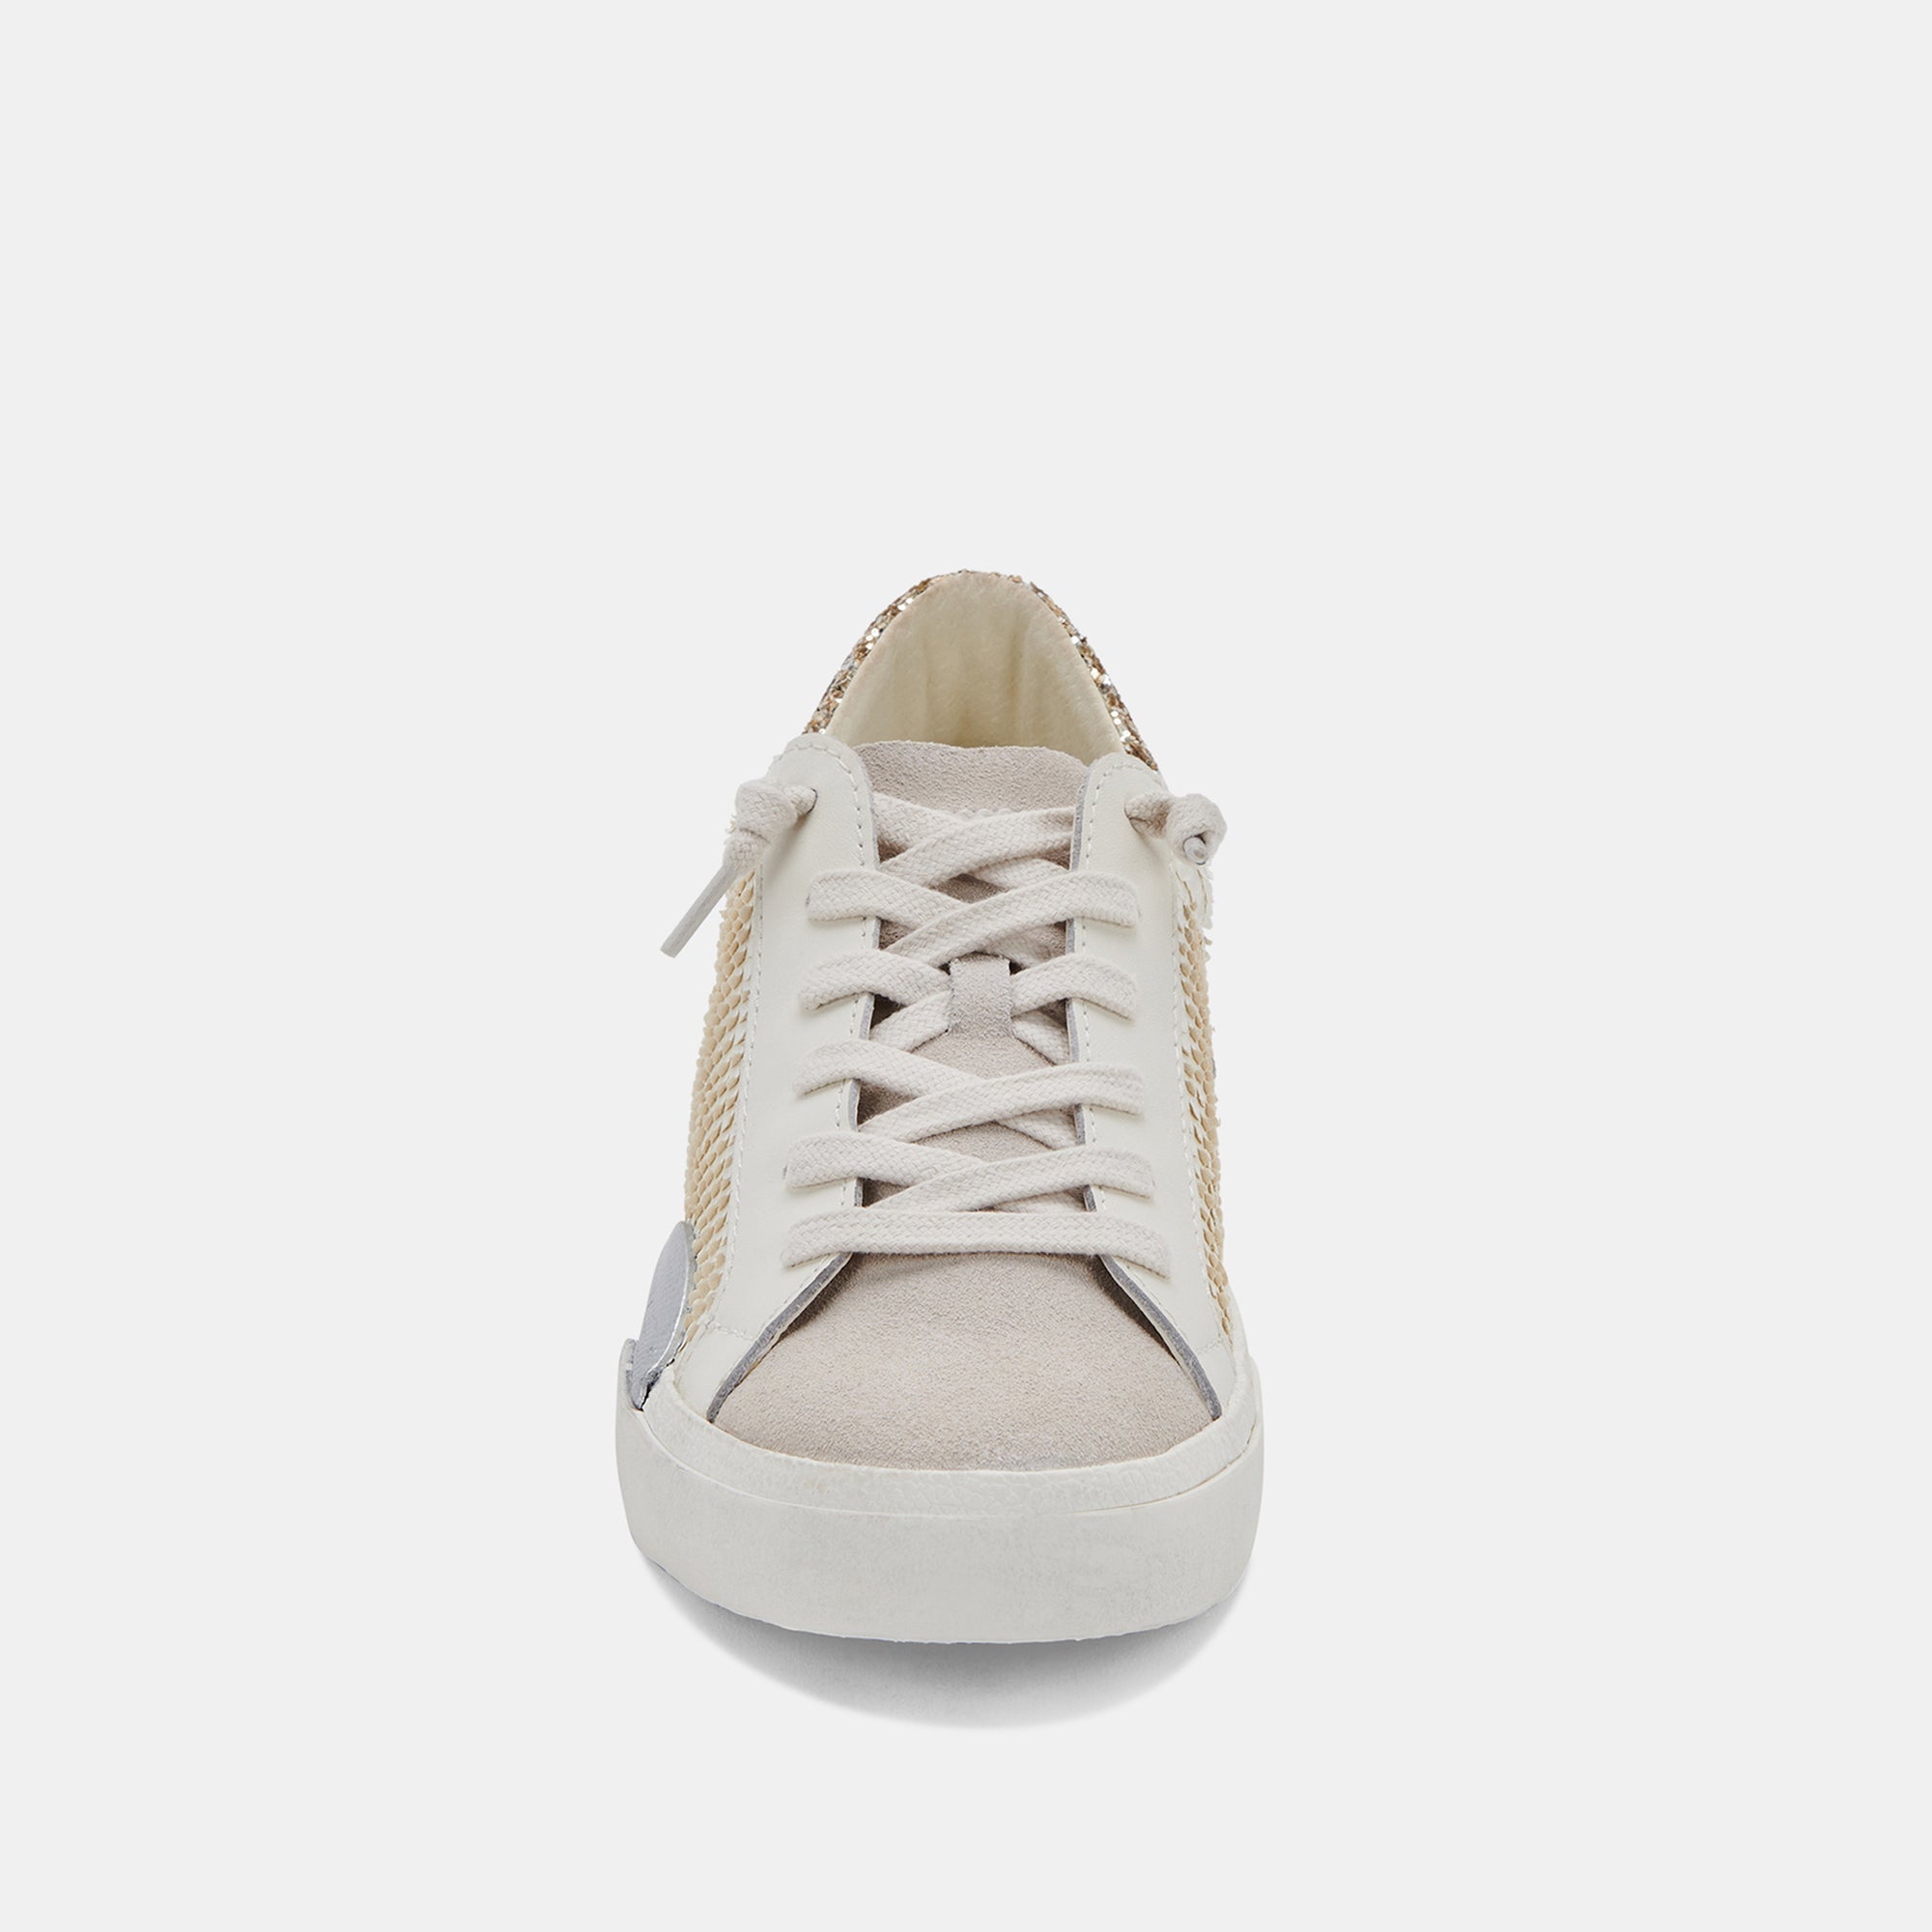 ZINA SNEAKERS OFF WHITE EMBOSSED LEATHER – Dolce Vita